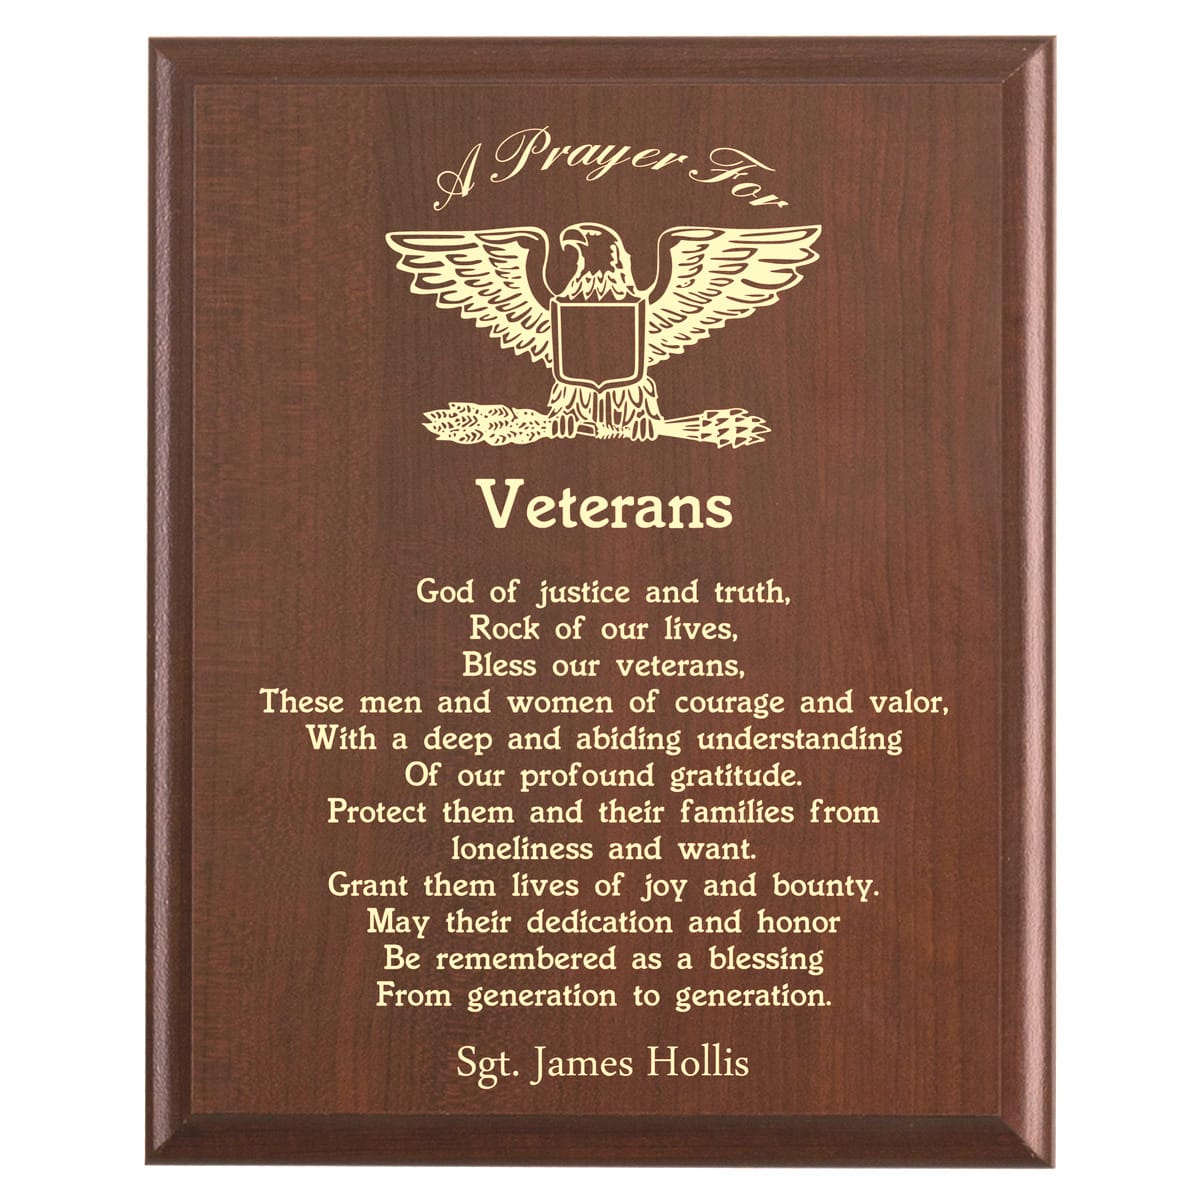 Plaque photo: Military Veteran Prayer Plaque design with free personalization. Wood style finish with customized text.